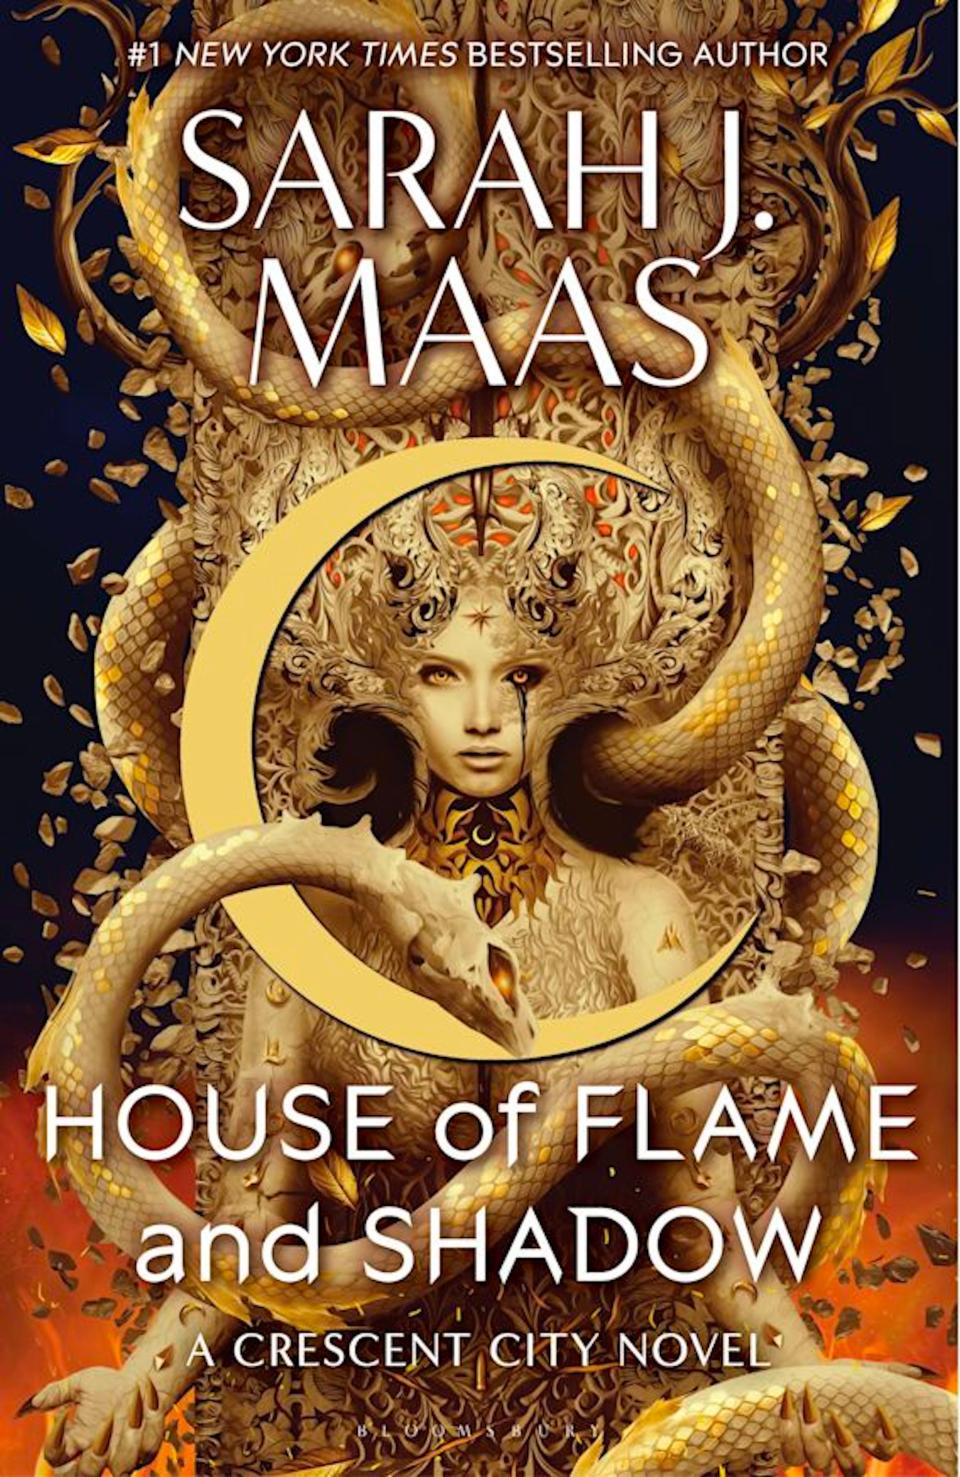 The cover of "House of Flame and Shadow" by Sarah J. Maas.